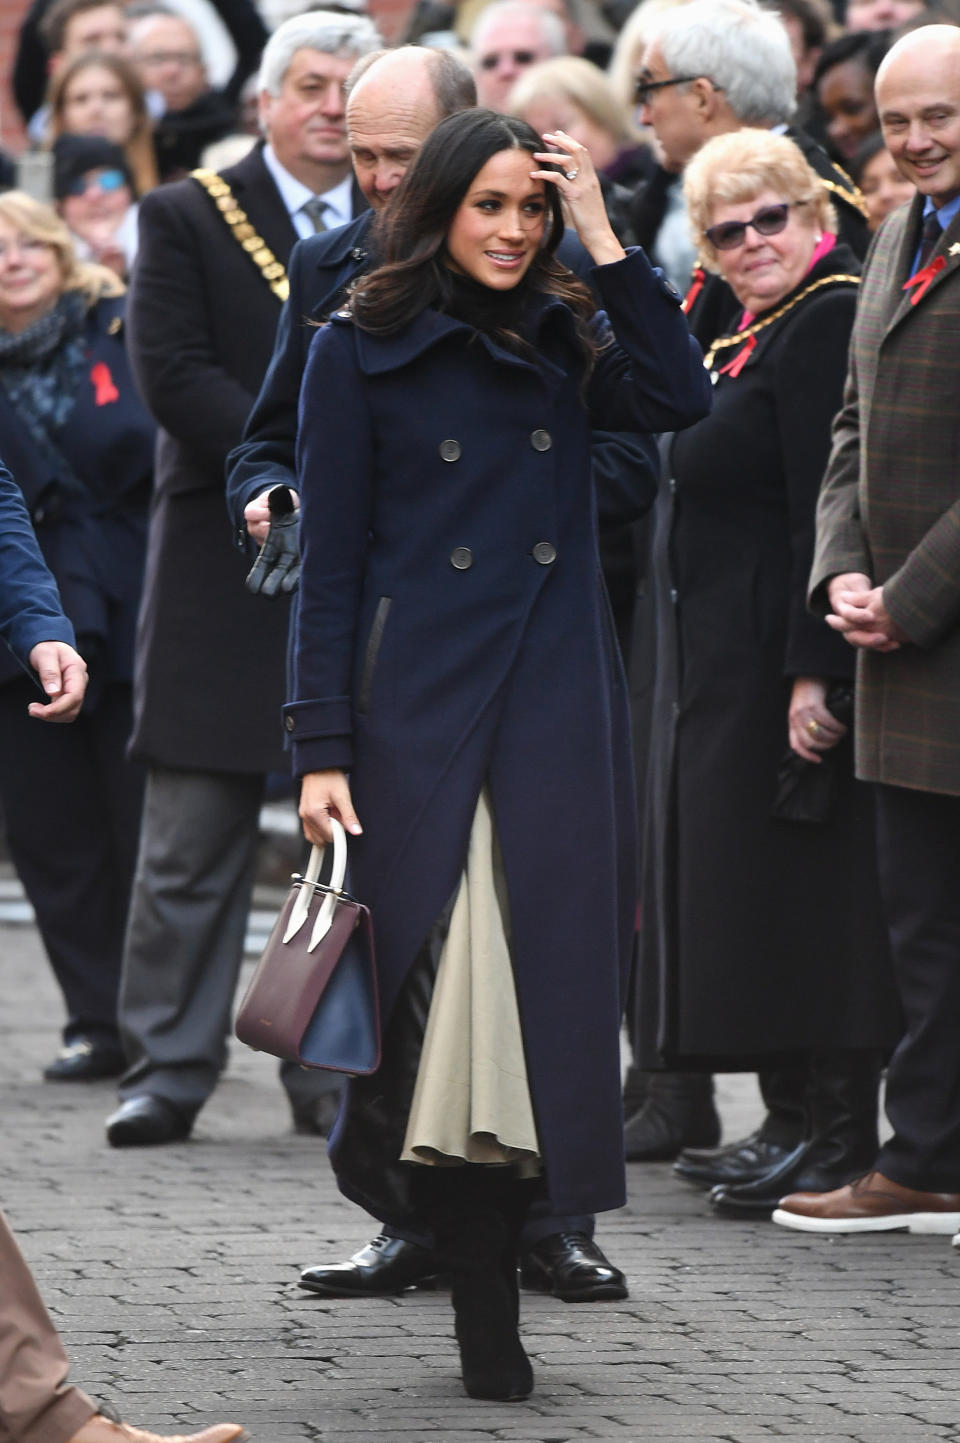 The royal-to-be paired her coat with heeled boats, a cream skirt, and a tri-tone handbag by Strathberry